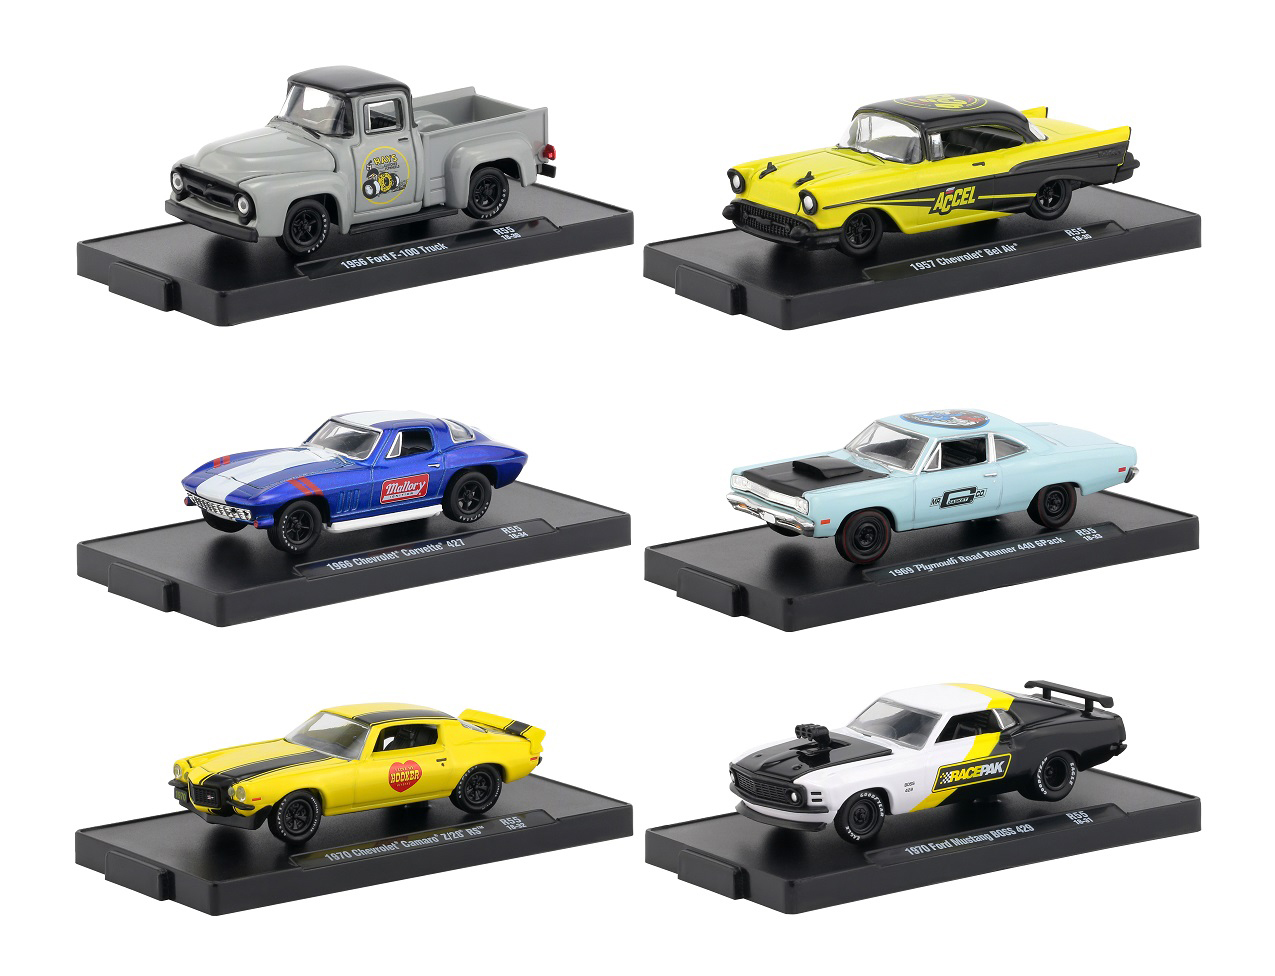 Drivers 6 Cars Set Release 55 In Blister Packs 1/64 Diecast Model Cars By M2 Machines